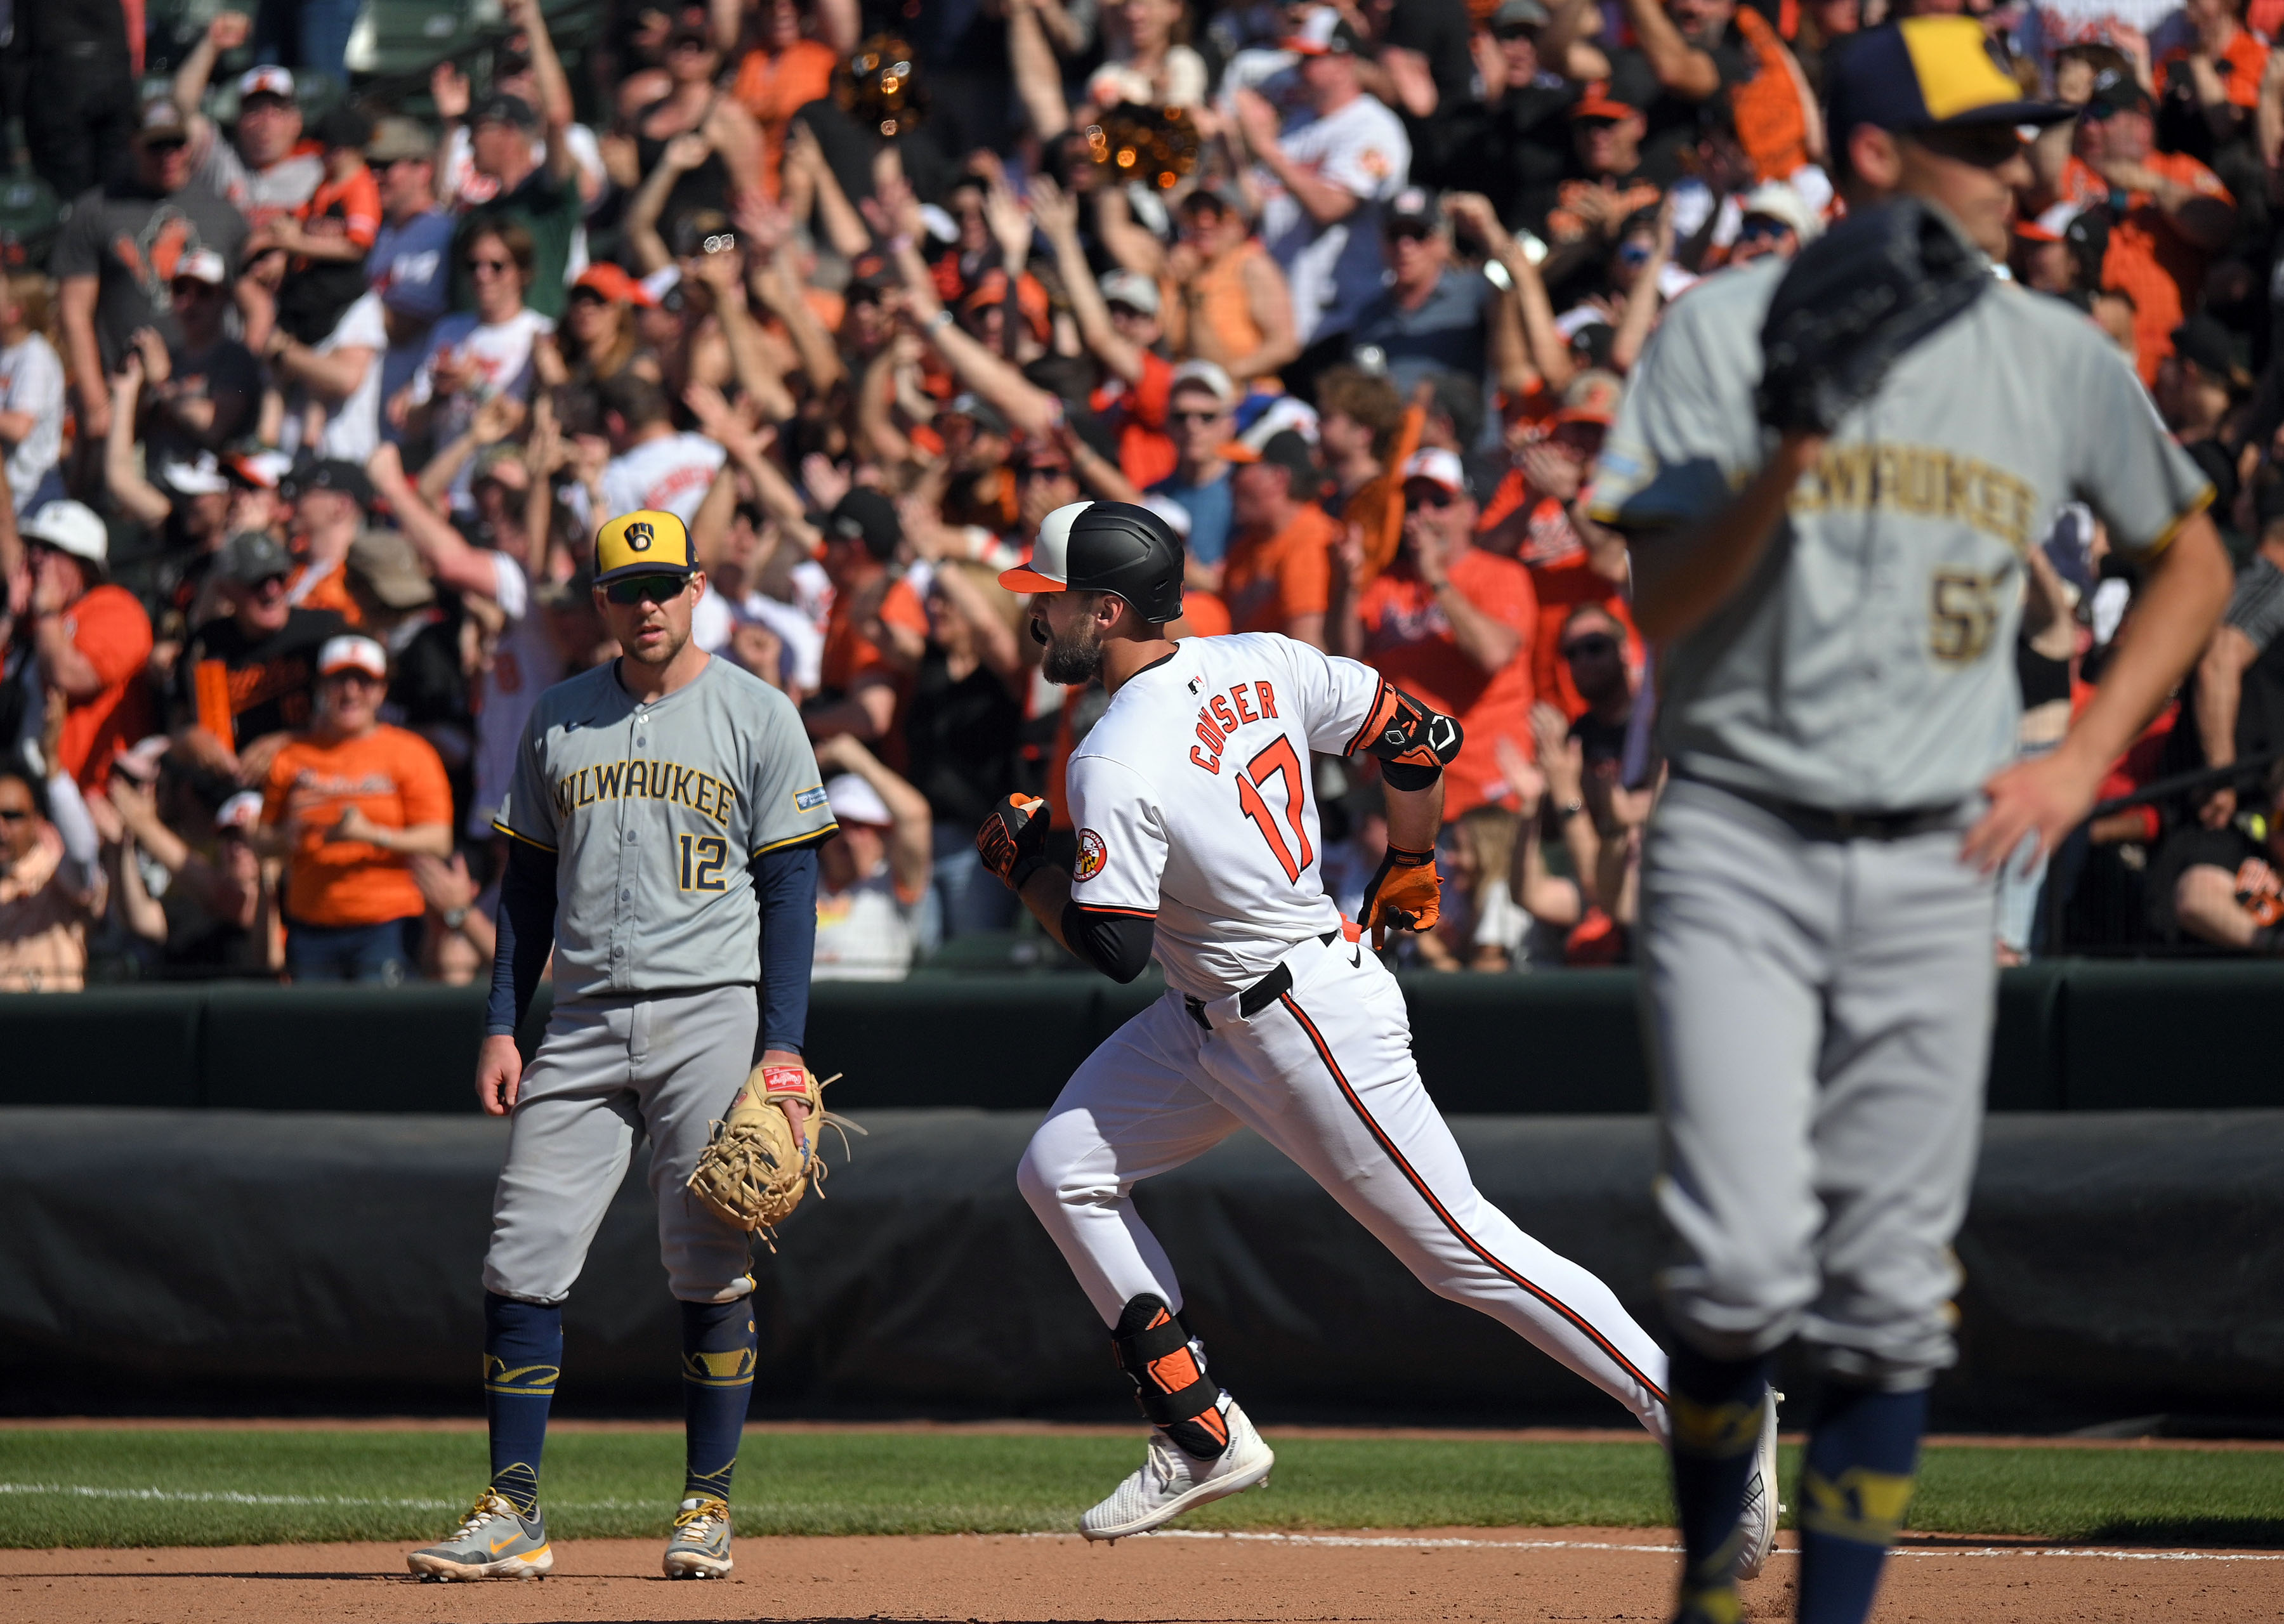 Orioles' Colton Cowser, center, runs past Brewers first baseman Rhys Hoskins, left, after solo homer against pitcher Hoby Milner, right, in the eighth inning. The Orioles defeated the Brewers 6-4 at Oriole Park at Camden Yards. (Kenneth K. Lam/Staff)